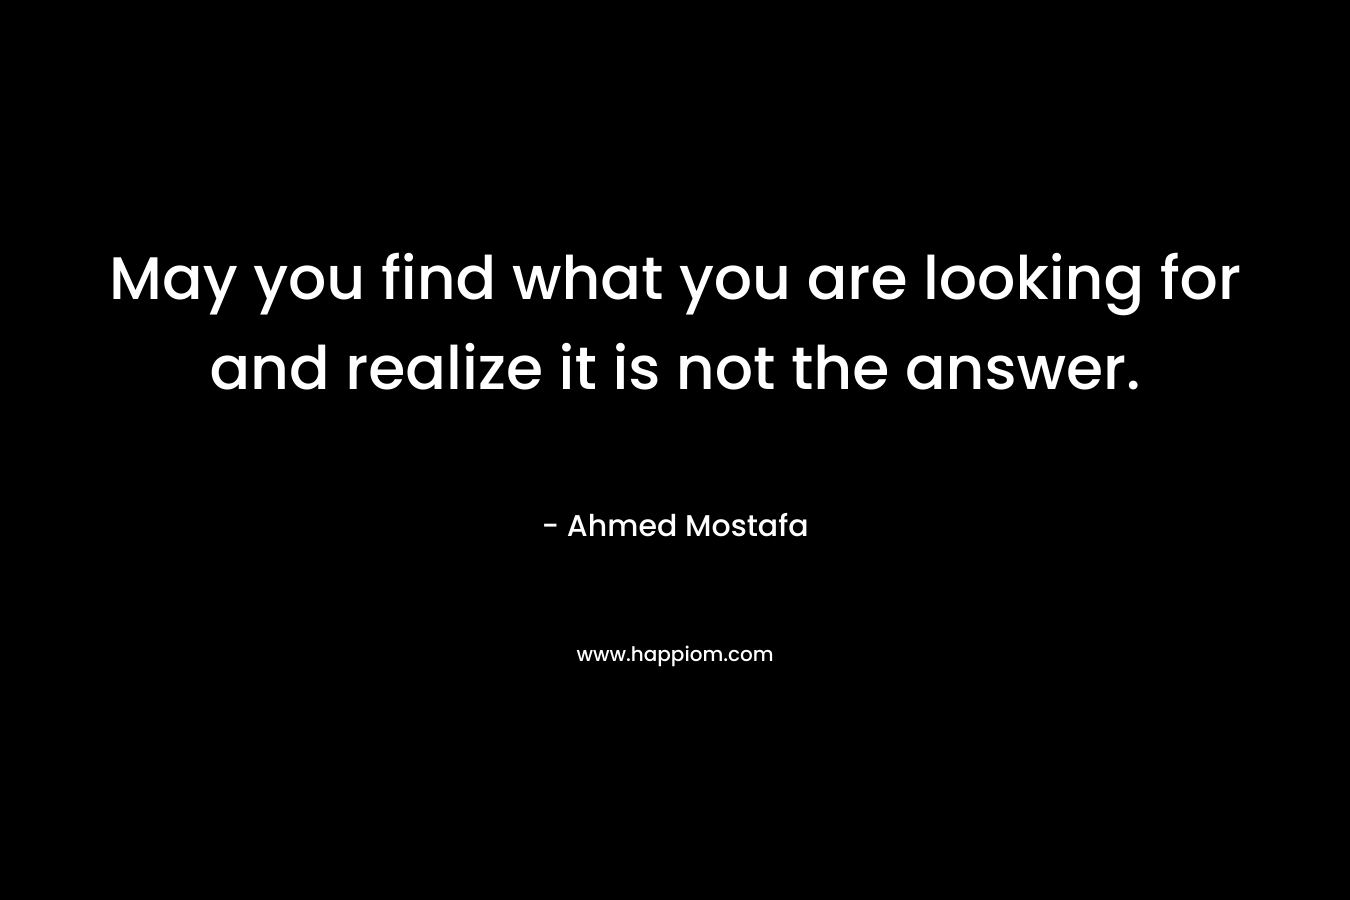 May you find what you are looking for and realize it is not the answer.